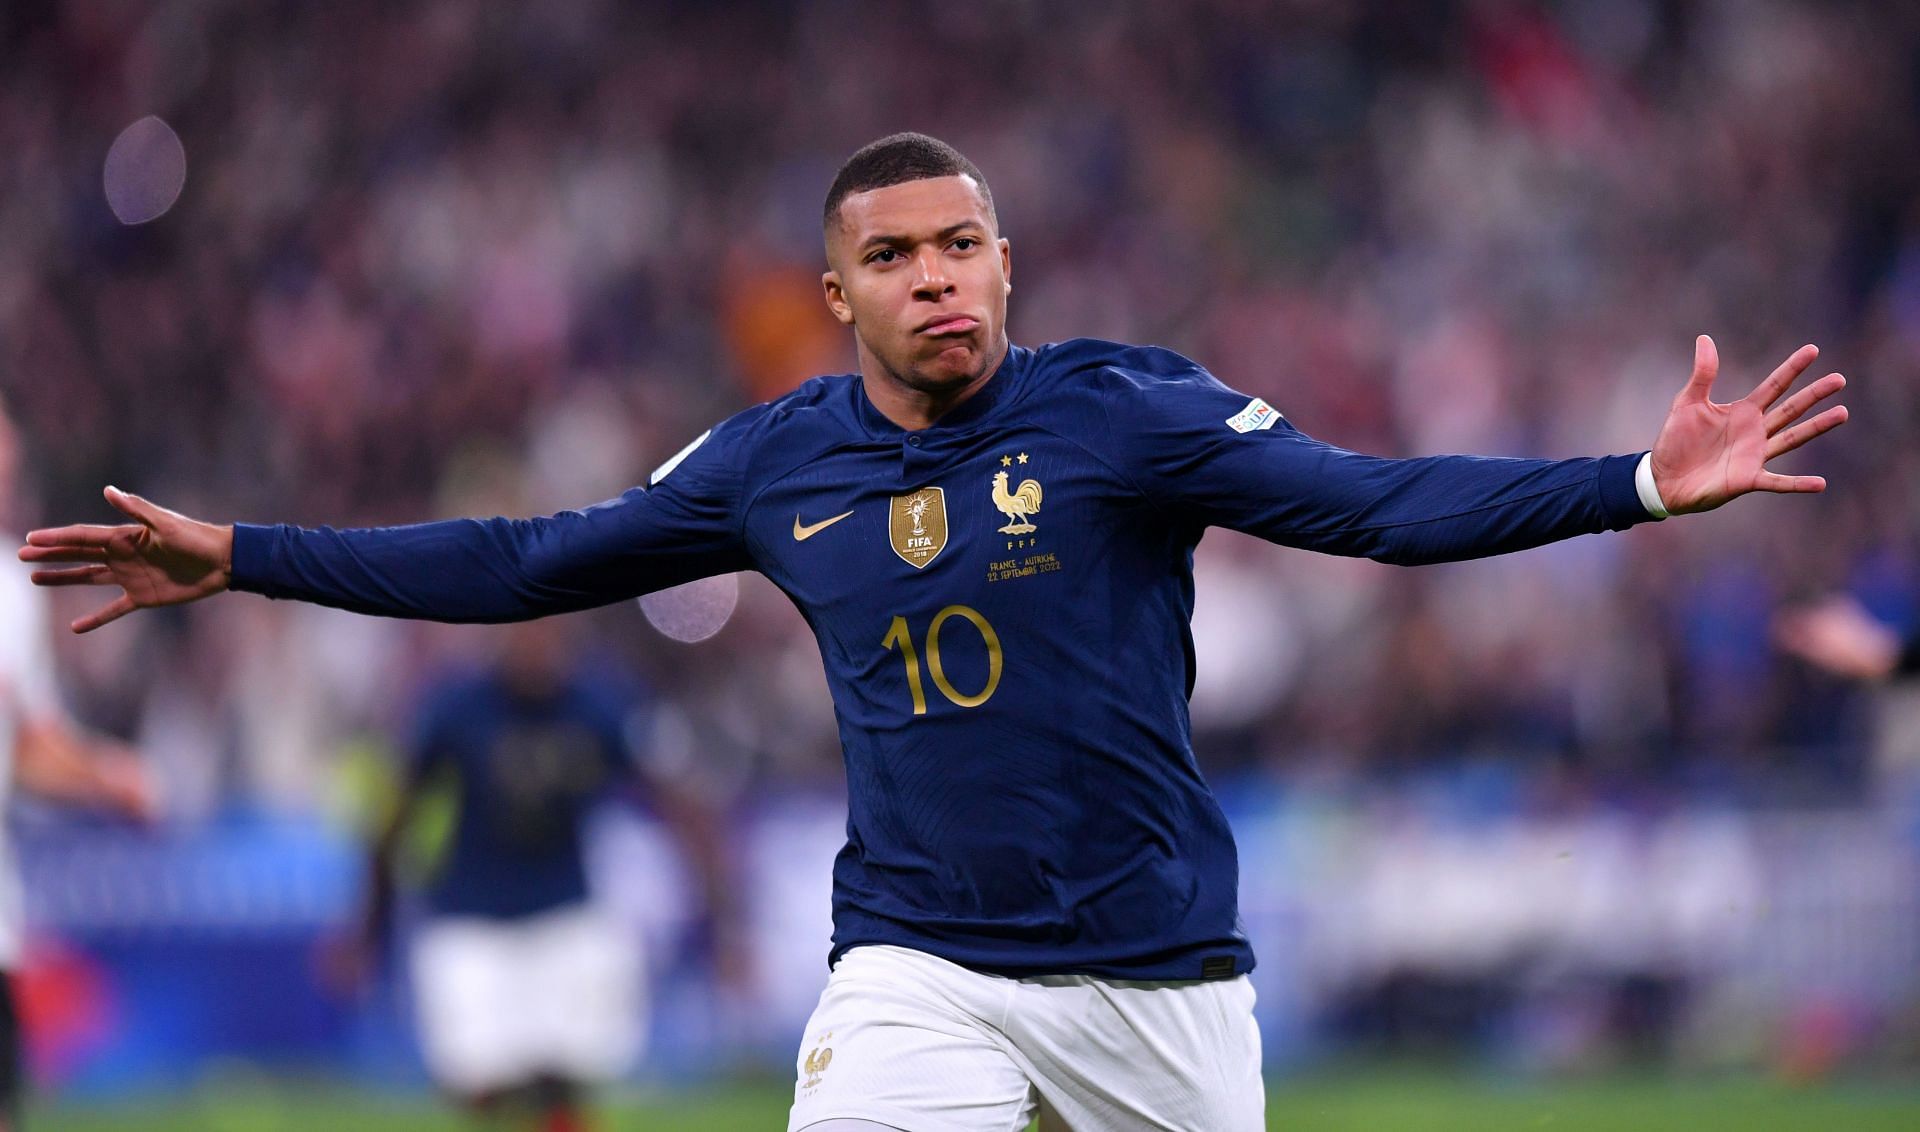 Mbappe to fire France to World Cup glory